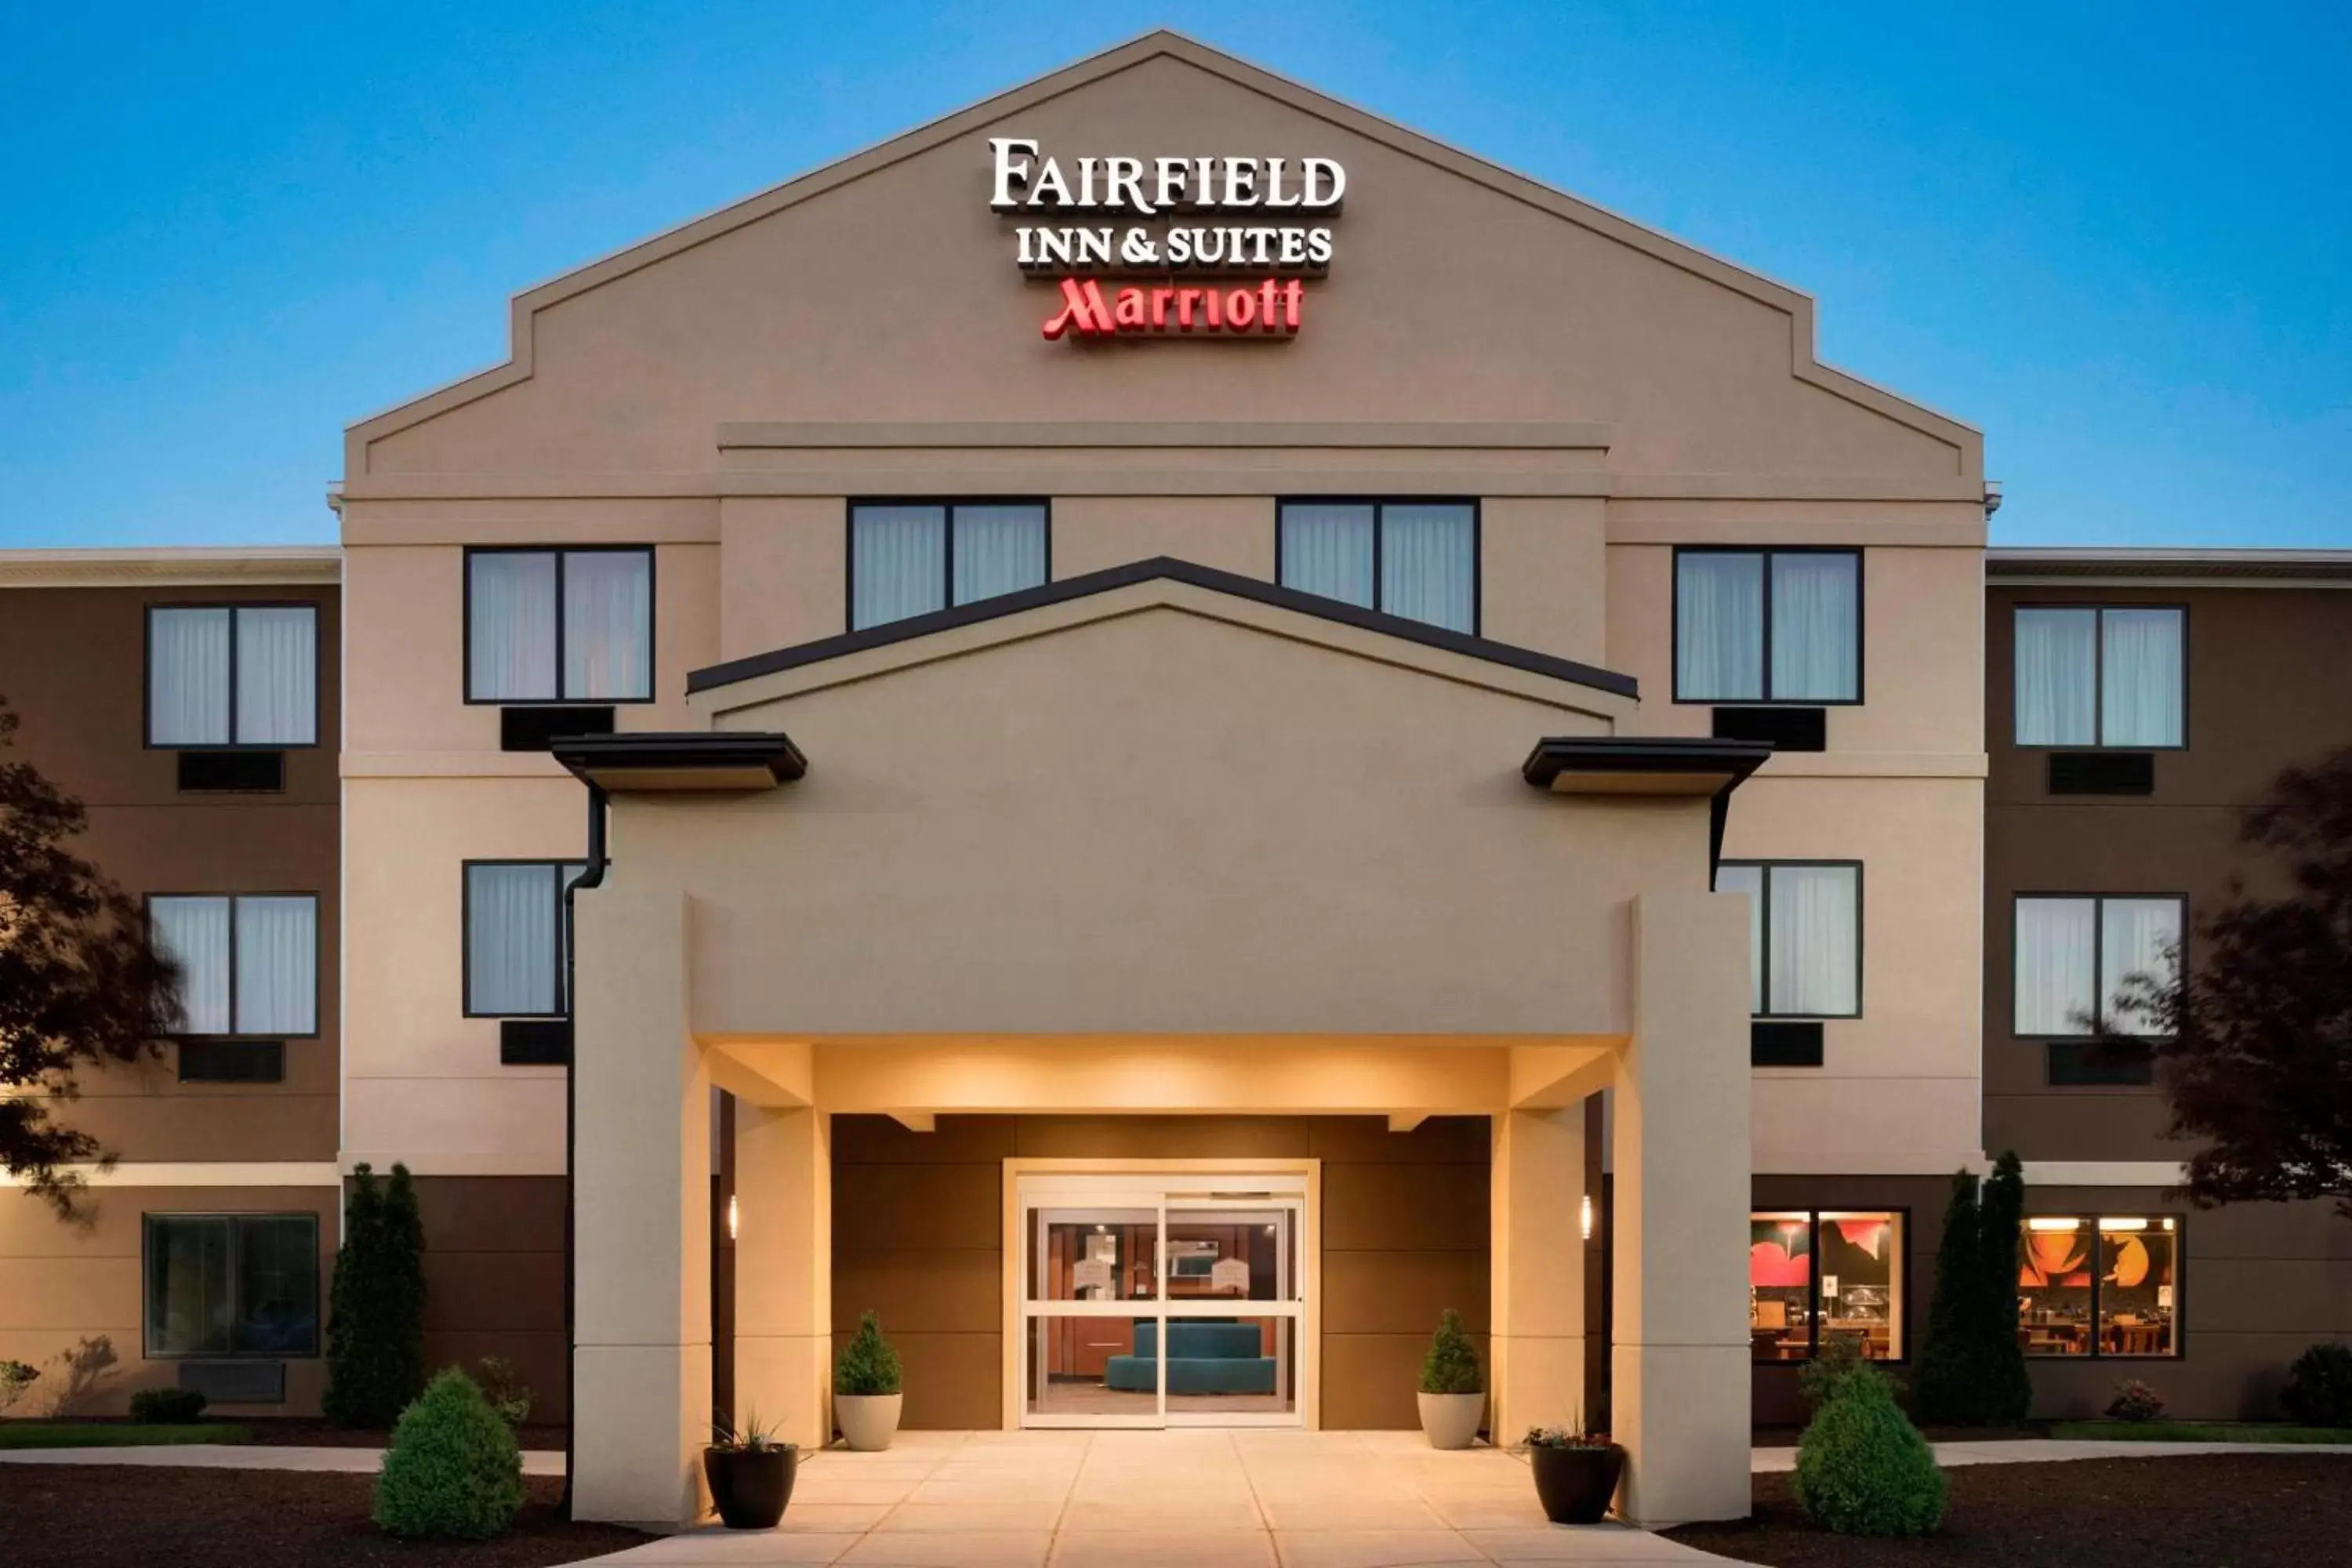 Property Building in Fairfield Inn & Suites Hartford Manchester